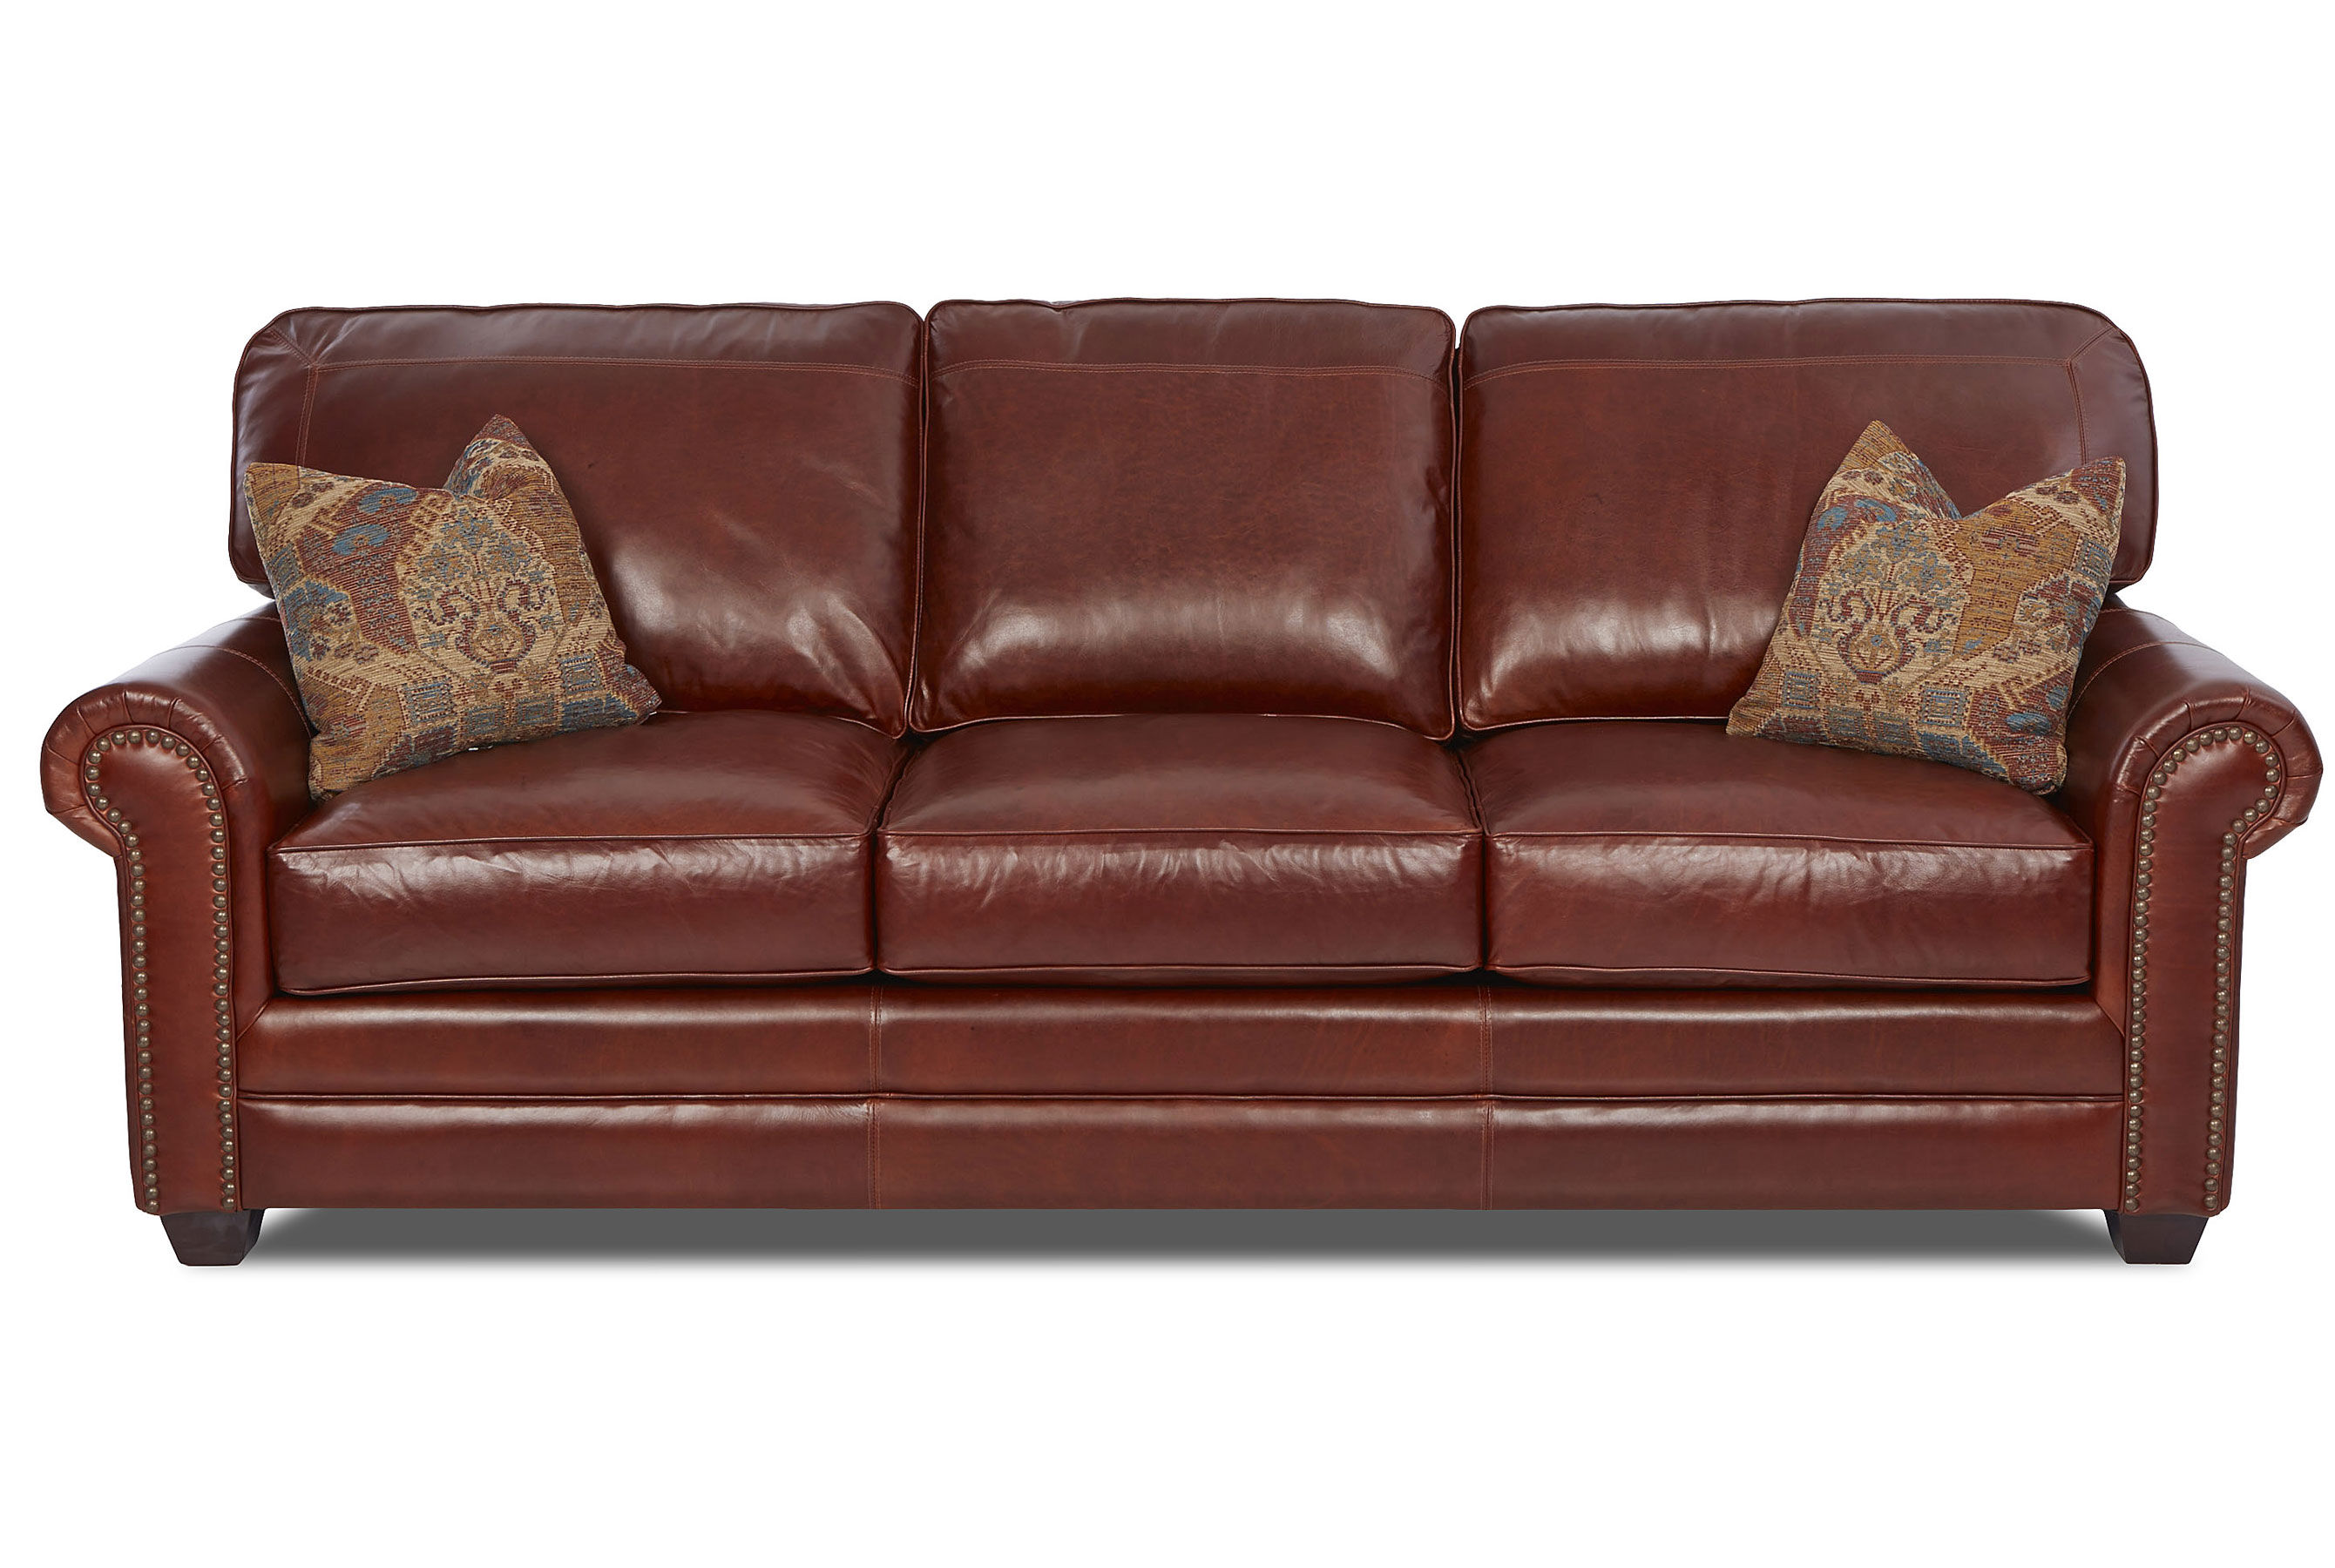 Epic Stationary Nailhead Leather Sofa, Leather Couch Repair Charlotte Nc